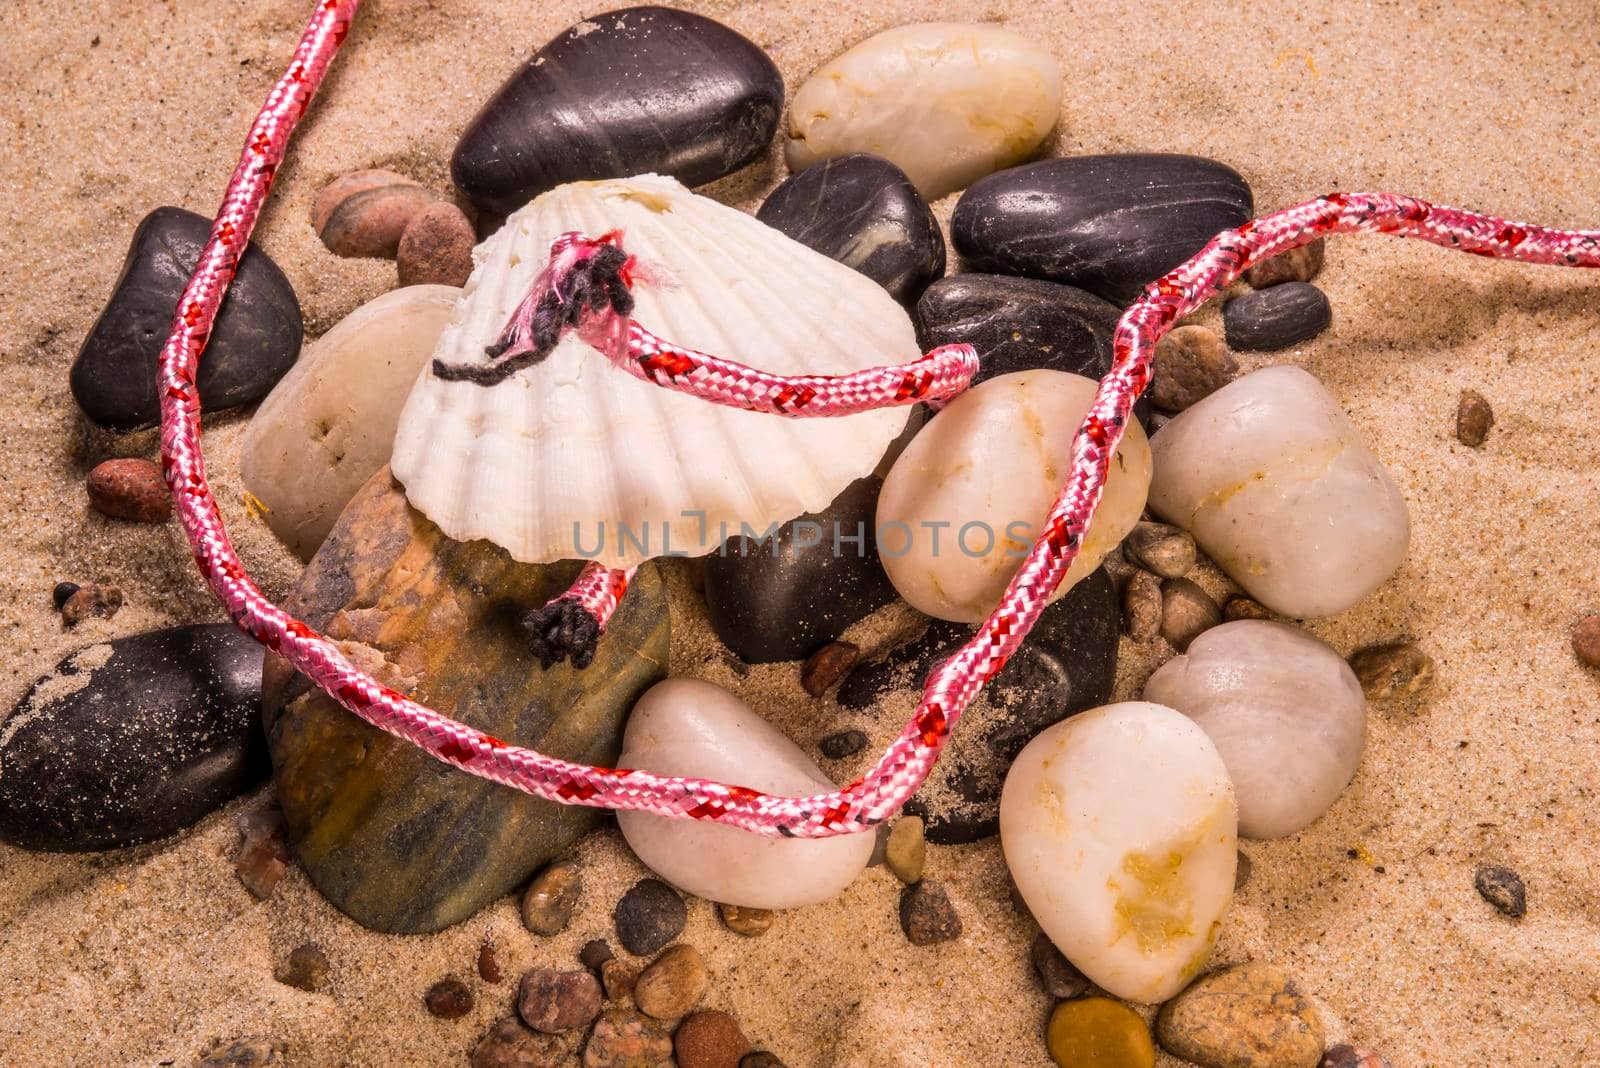 pink rope, plastic pollution on a beach with mussel and stones by Jochen